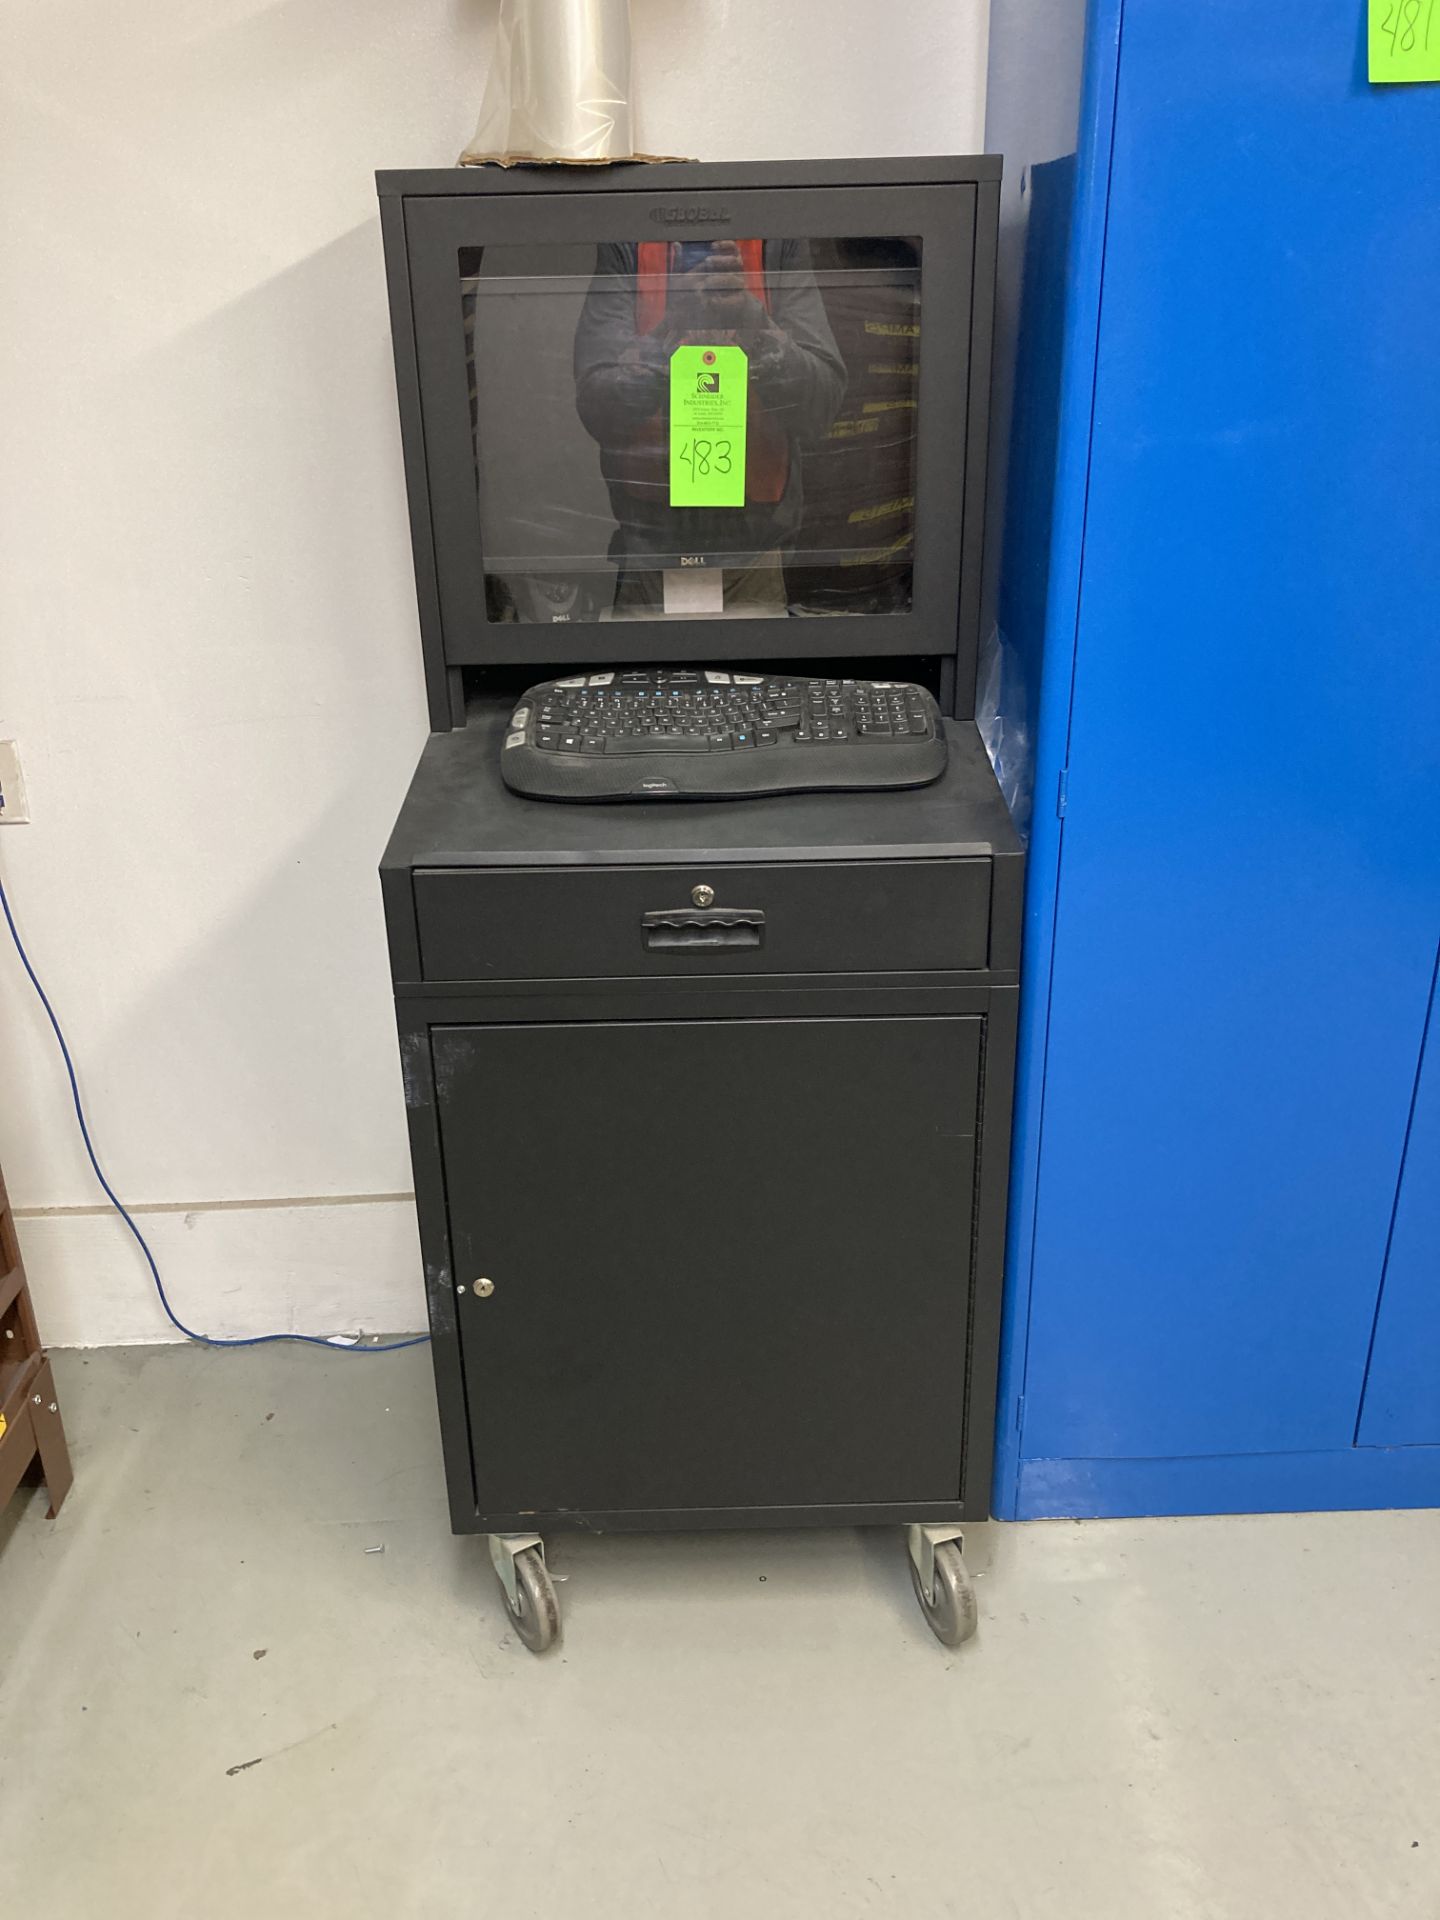 Steel computer workstation, 24 in w x 22 in d x 63 in hgt Rigging Fee: $ 35